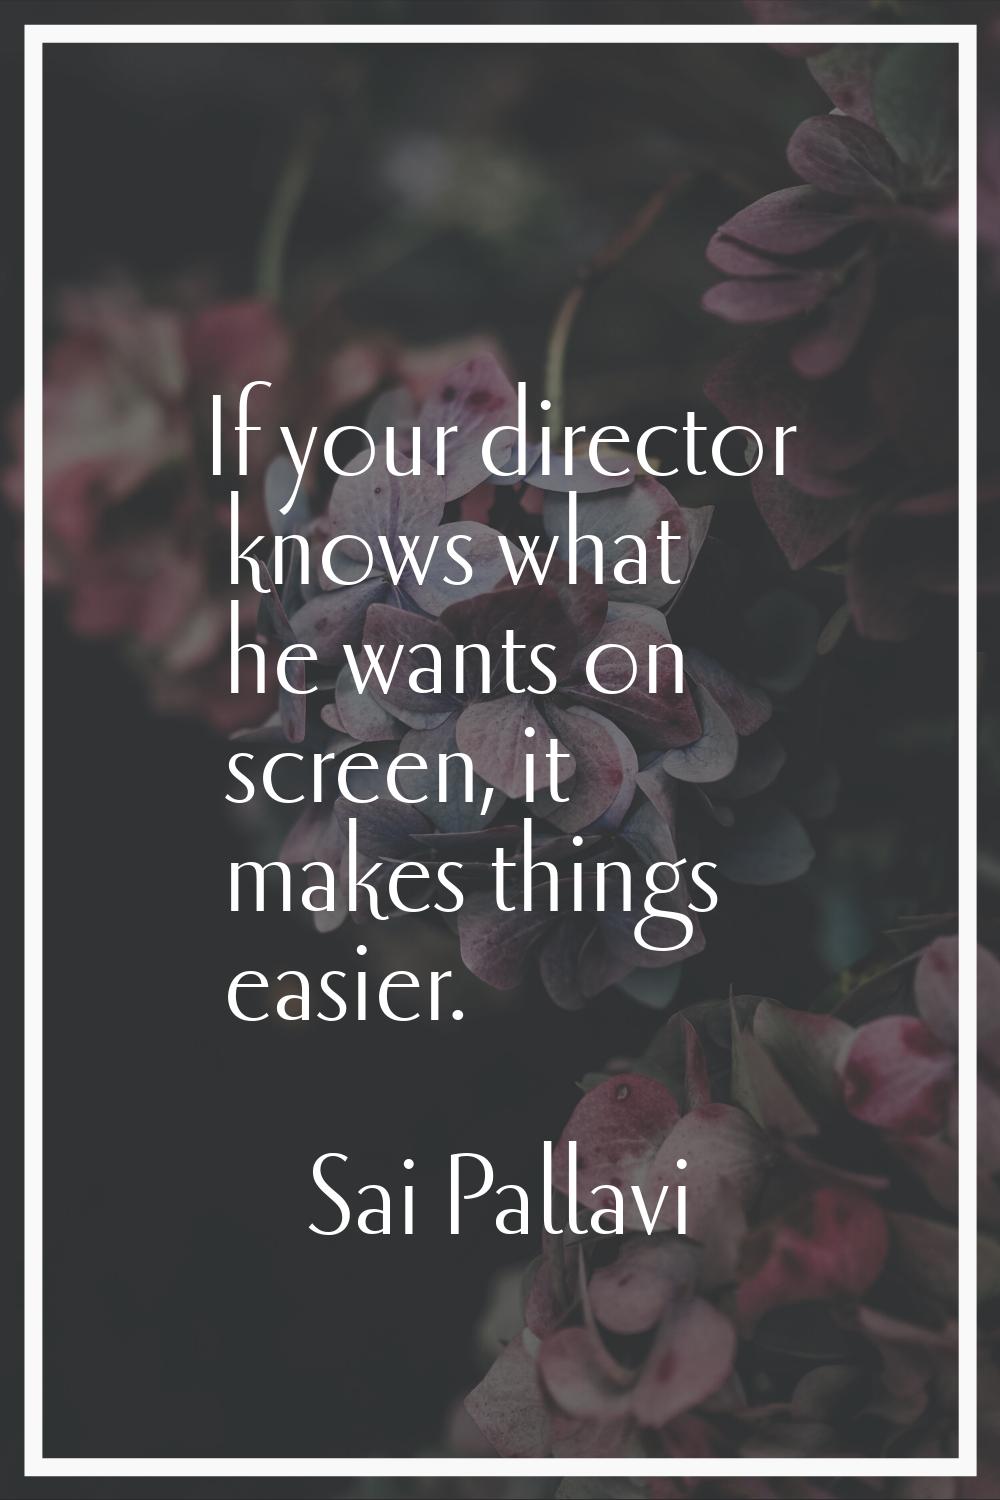 If your director knows what he wants on screen, it makes things easier.